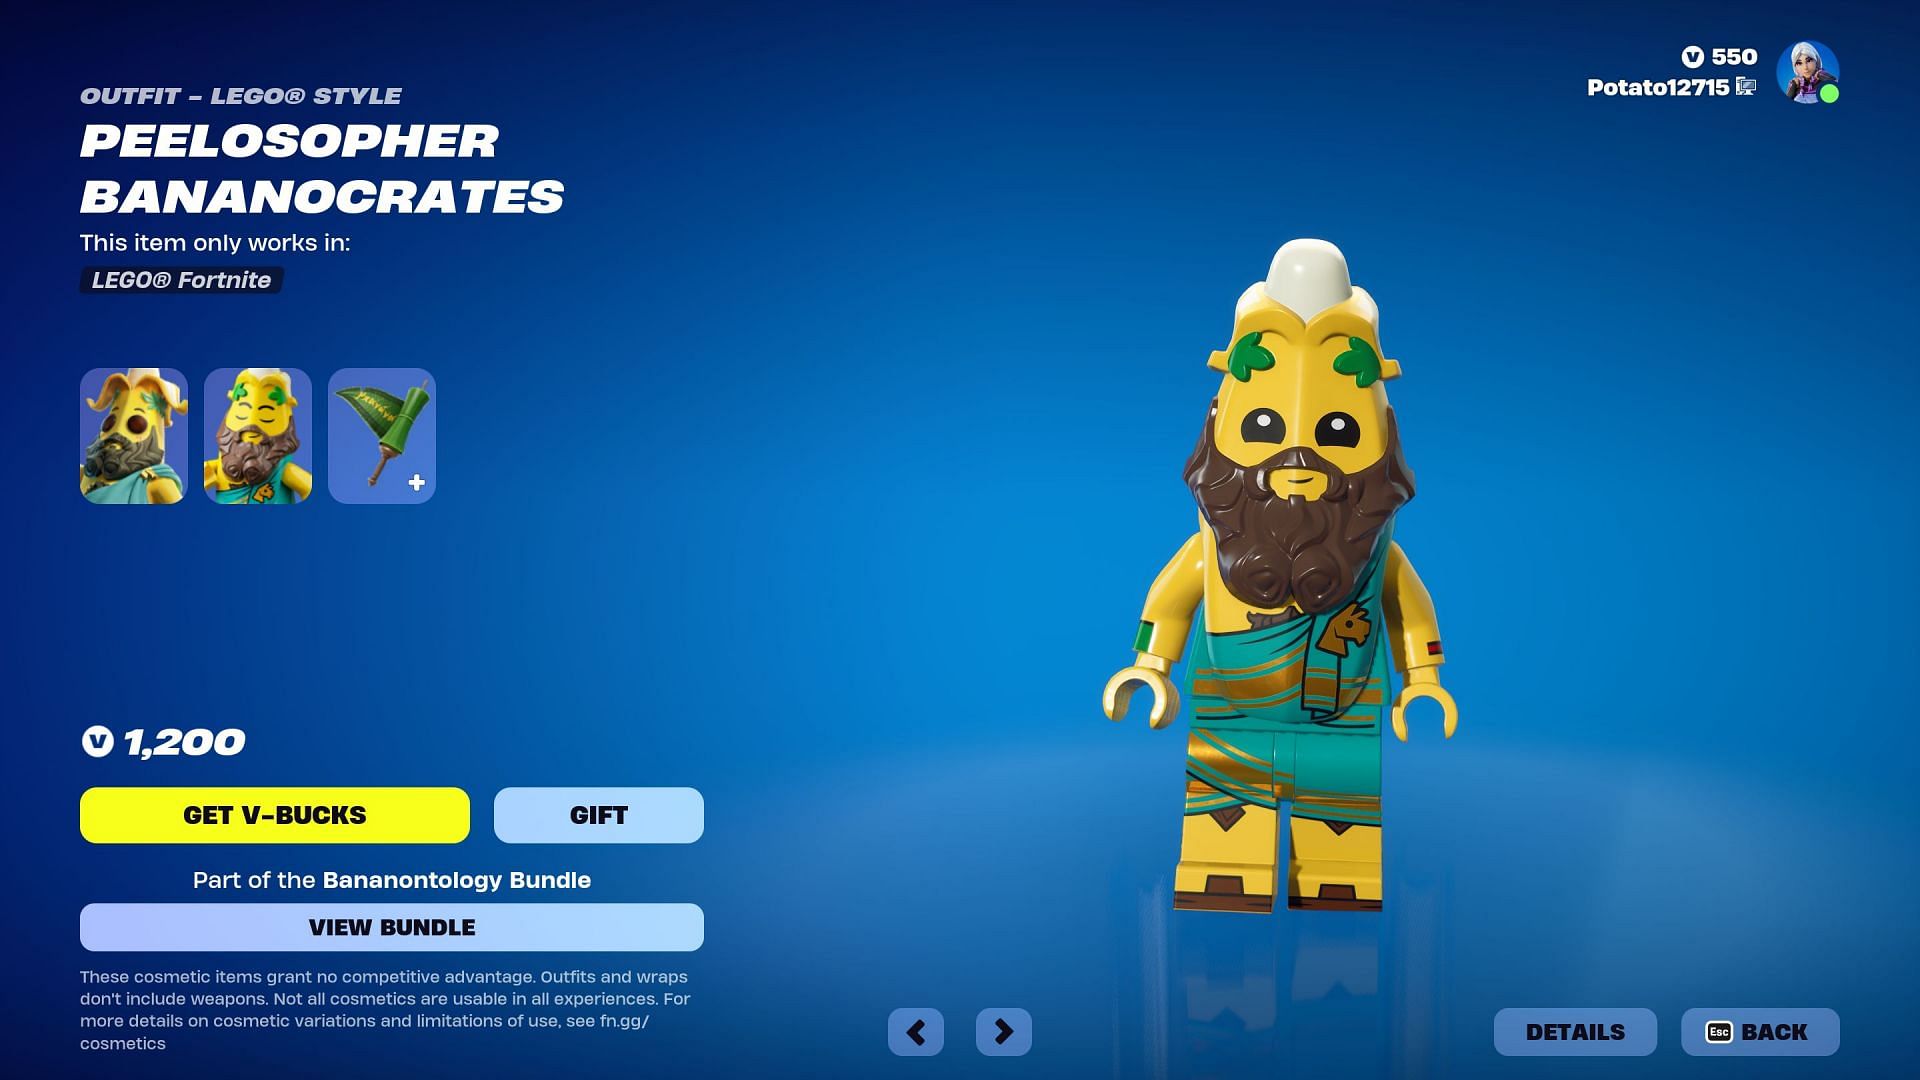 Peelosopher Bananocrates could be listed in the Item Shop until the first week of May (Image via Epic Games/Fortnite)